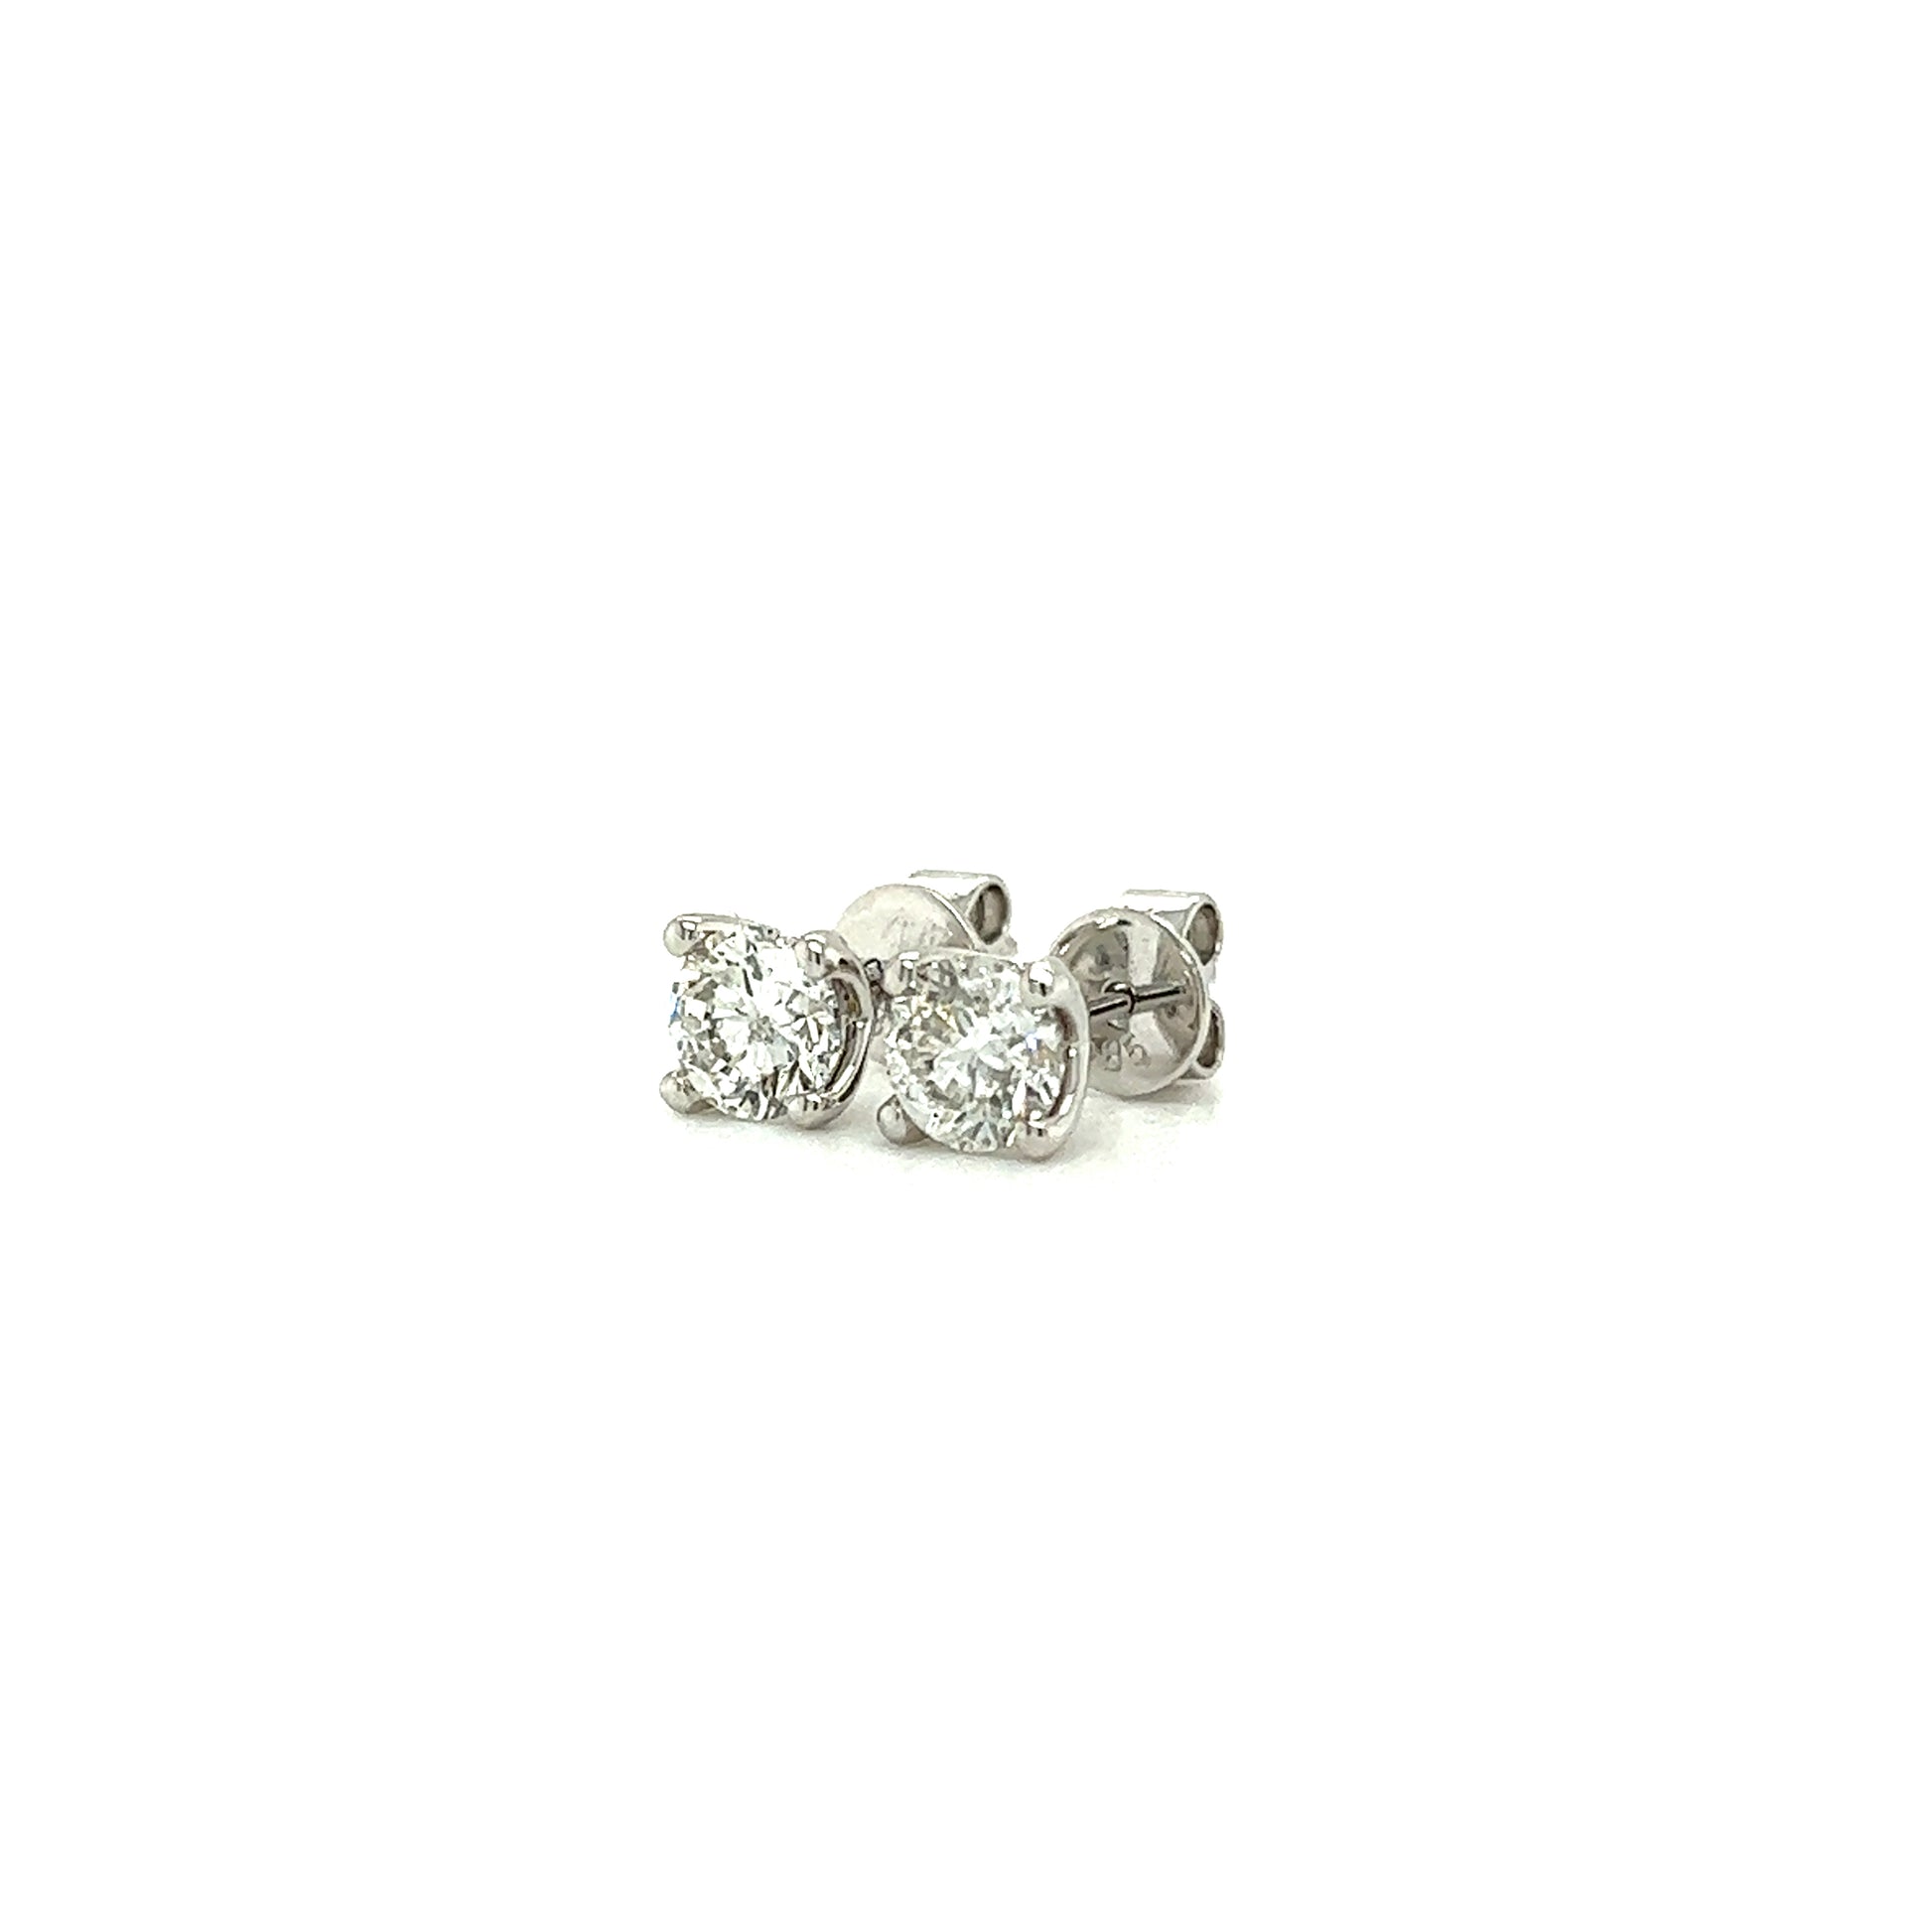 Diamond Stud Earrings with 1ctw of Diamonds in 14K White Gold Right Side View